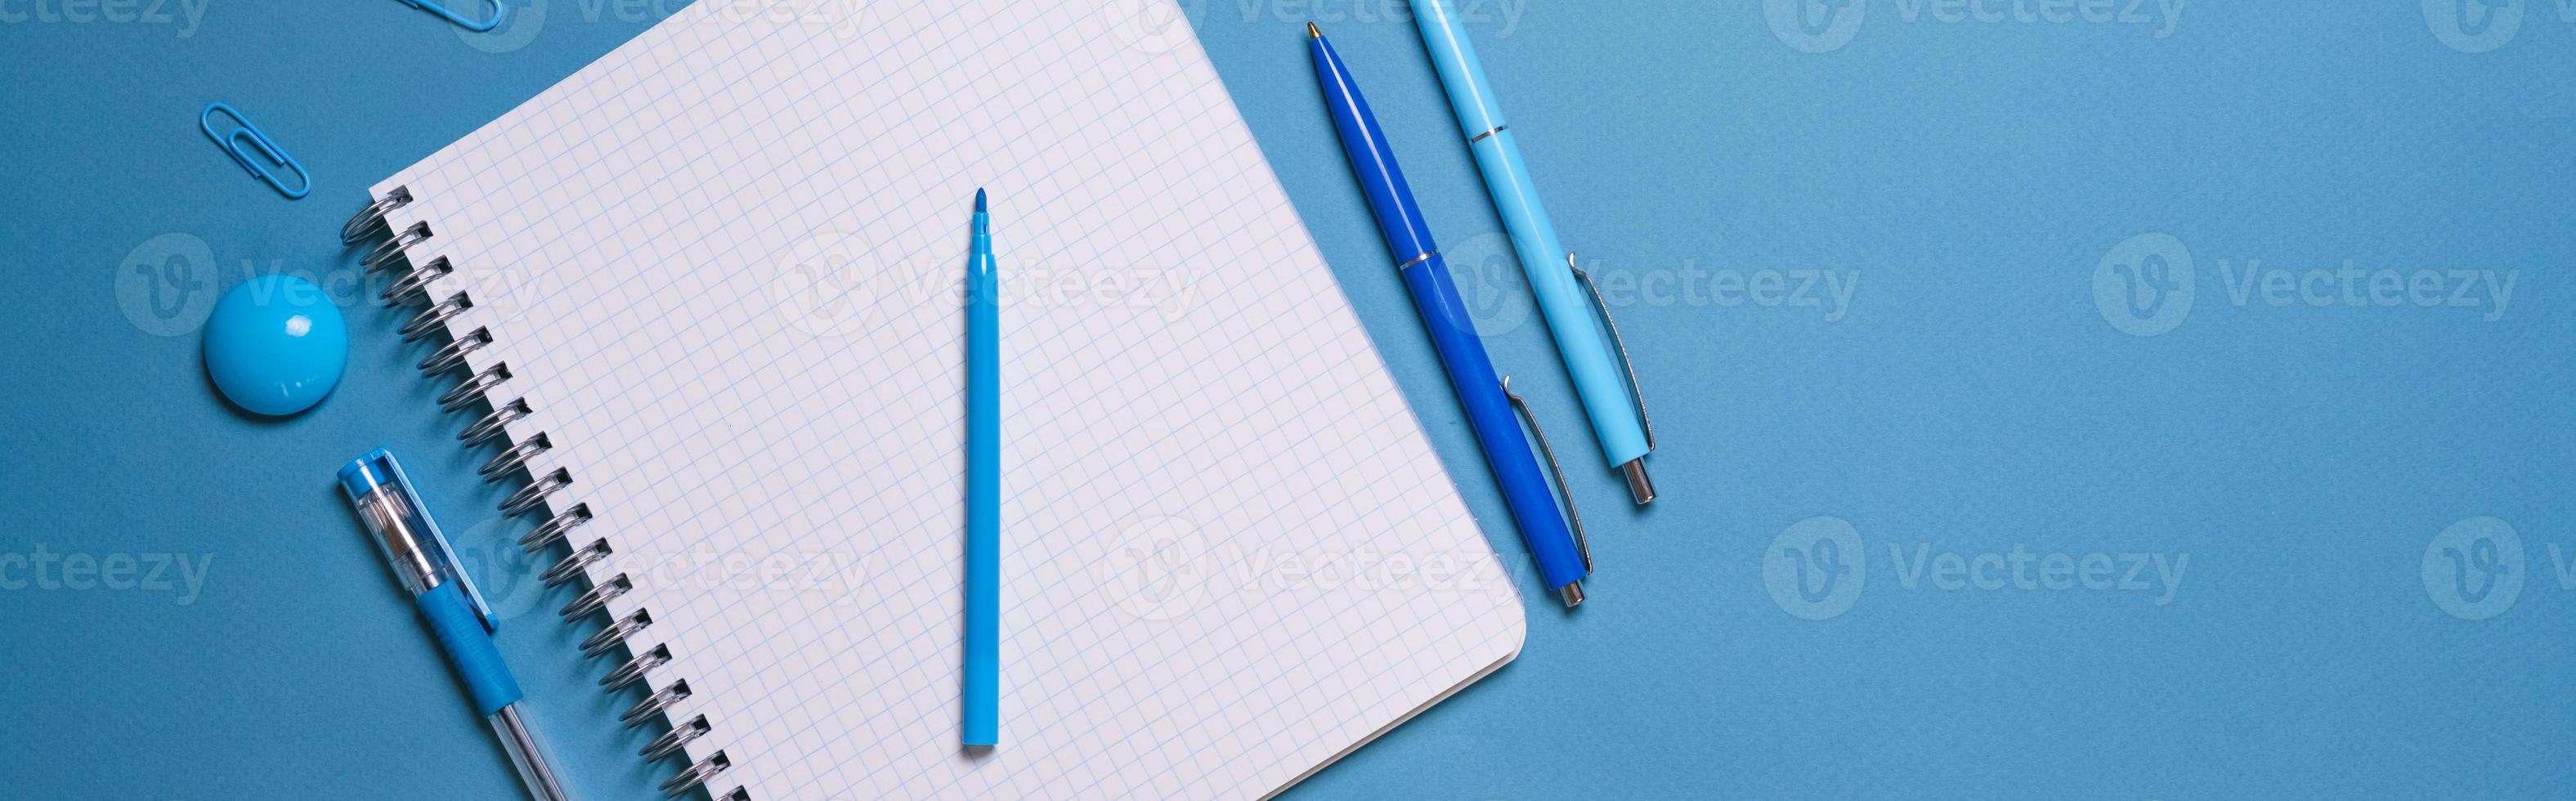 Notebook and pen on a blue background. Top view with copy space. Stationery photo